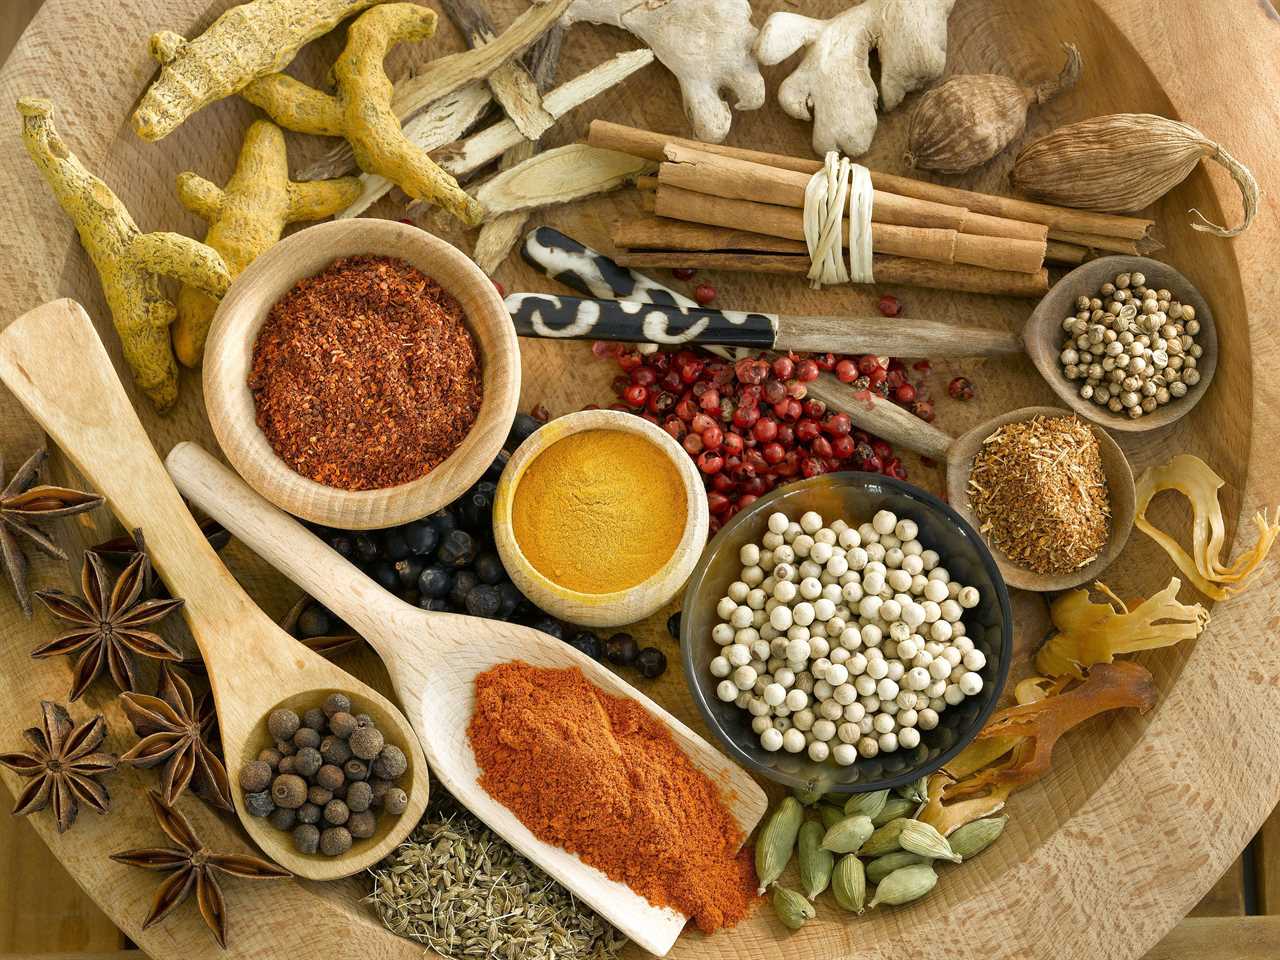 The Science Behind the Flavor Profile of Different Spices